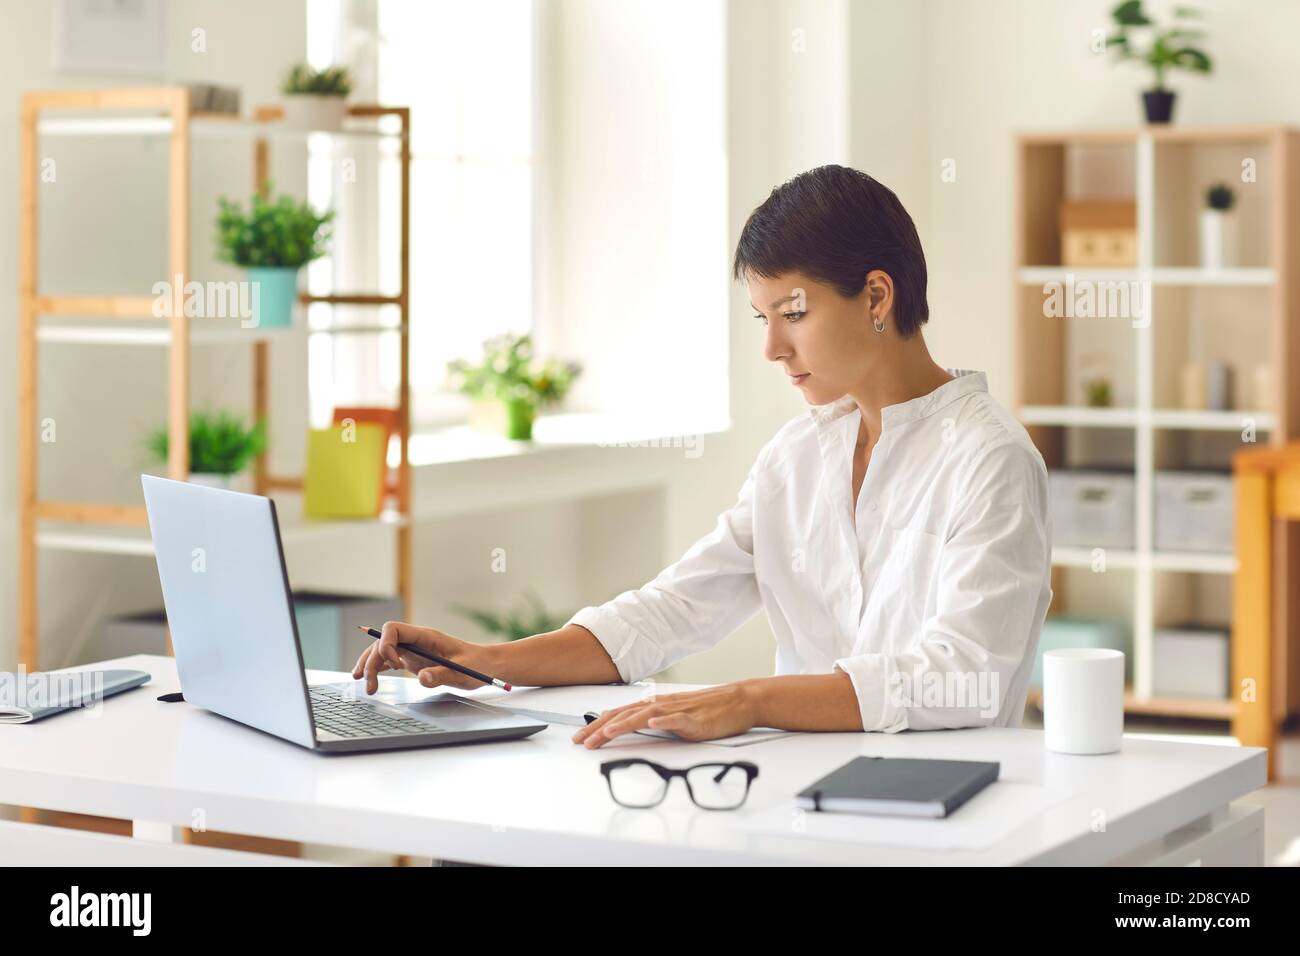 Young business woman sitting and working on laptop in office Stock Photo